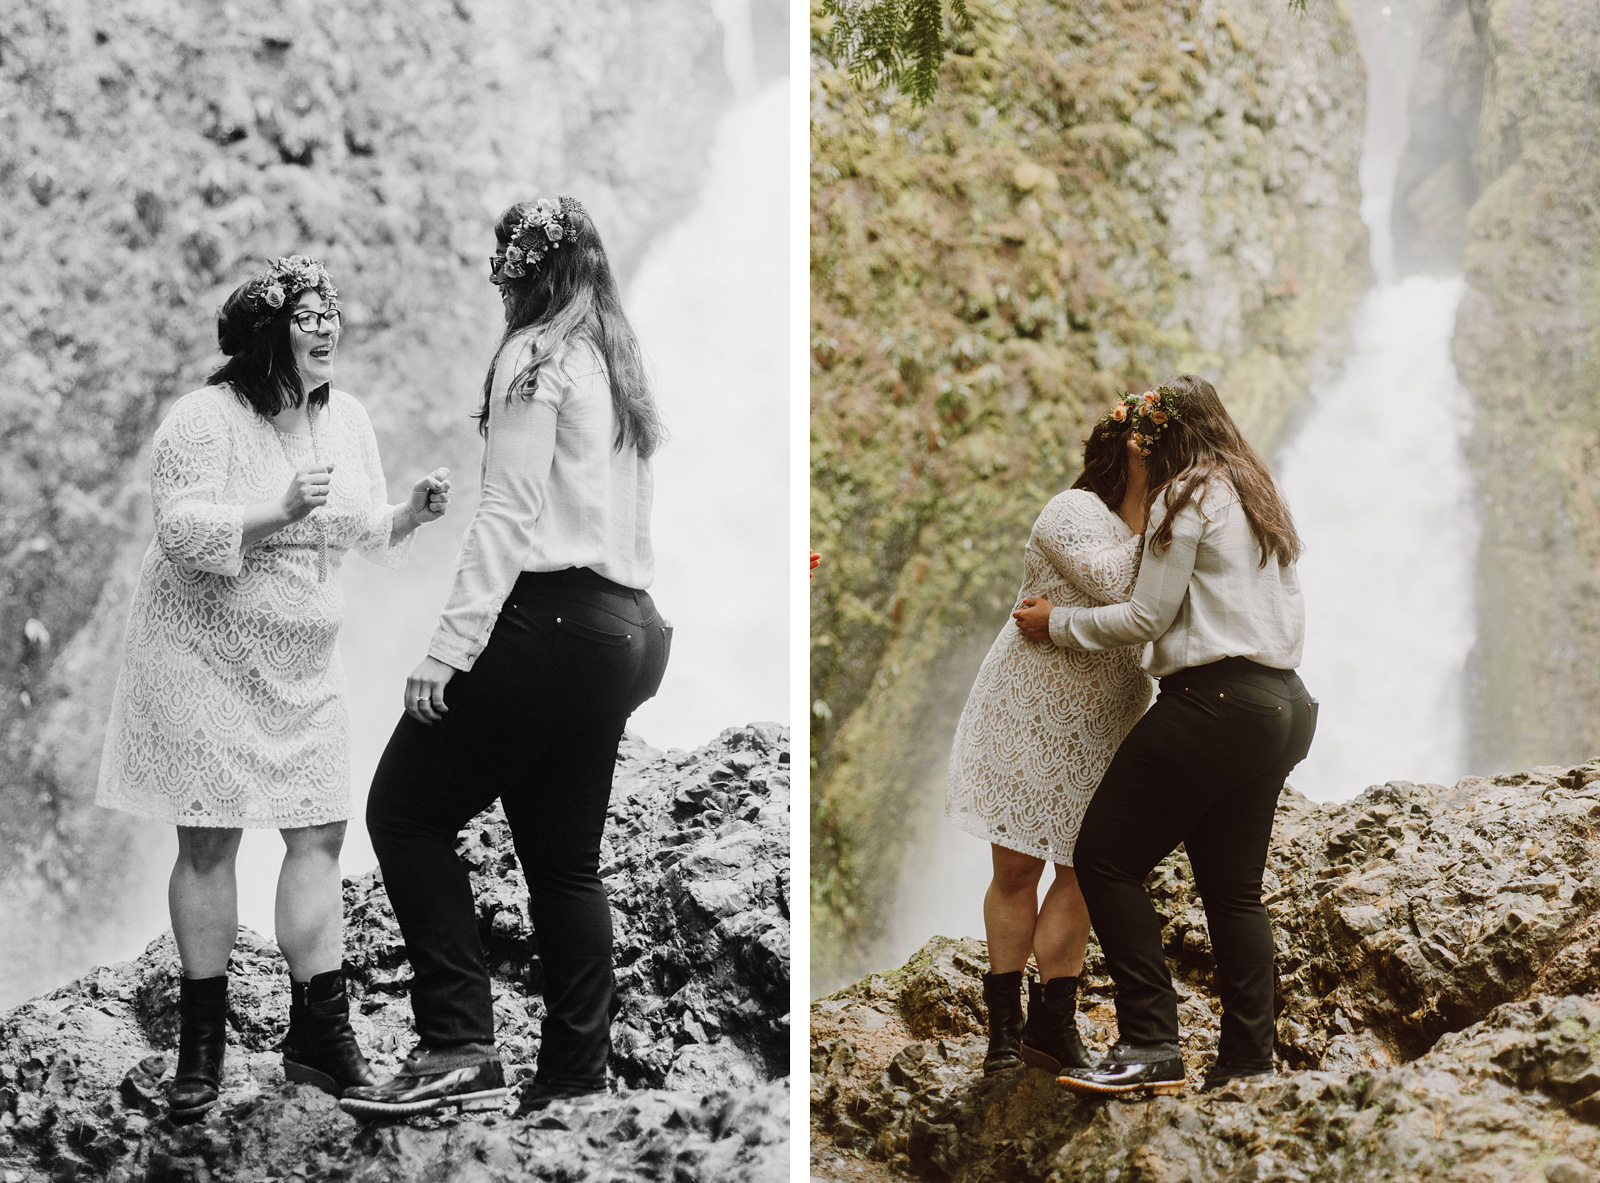 Brides cheering after wedding ceremony at a Portland waterfall elopement